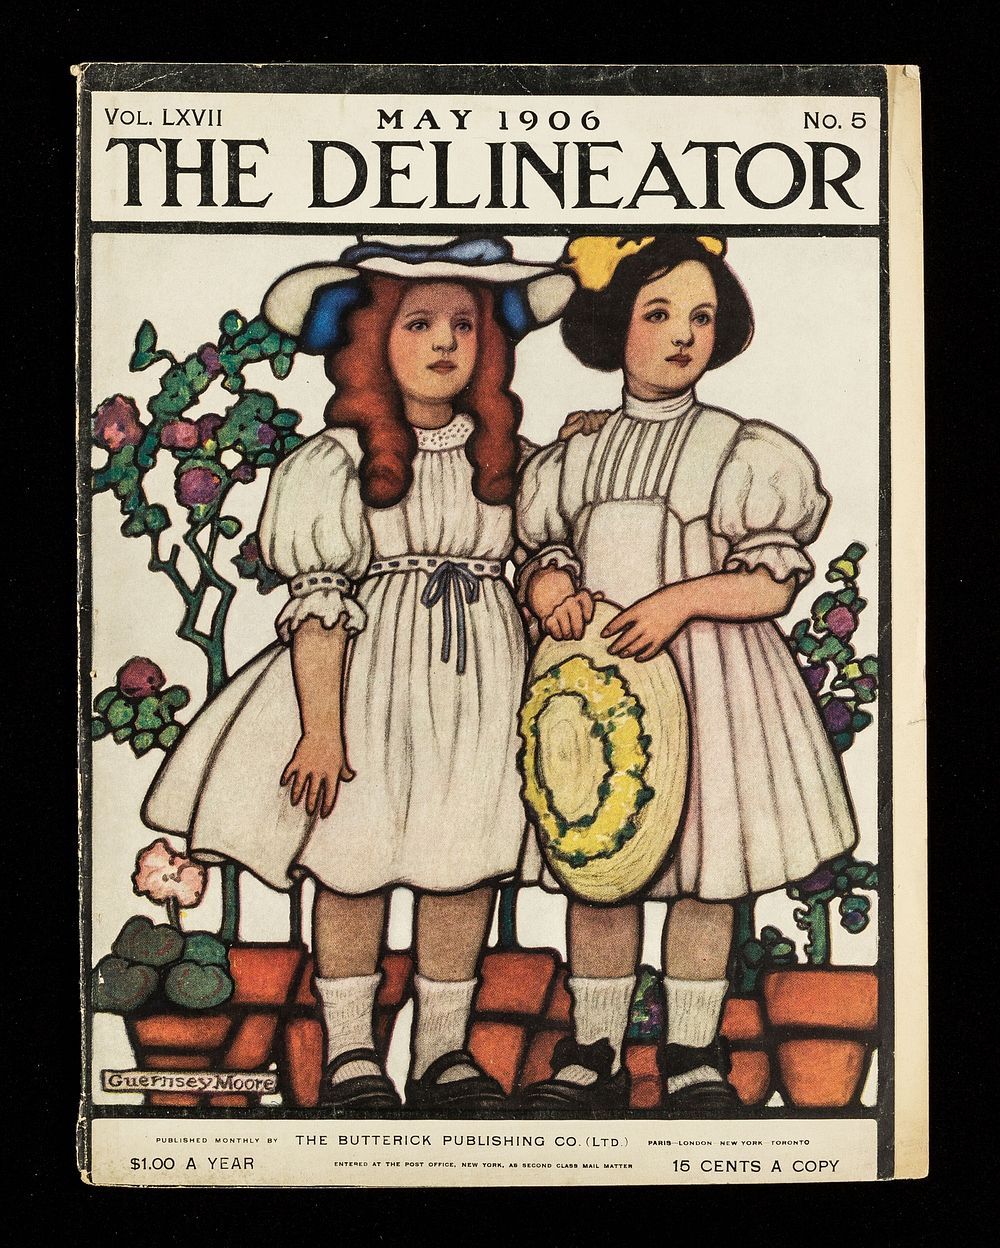 The delineator. Vol.LXVII, no.5, May 1906 : [cover only] / The Butterick Publishing Co. (Ltd.).